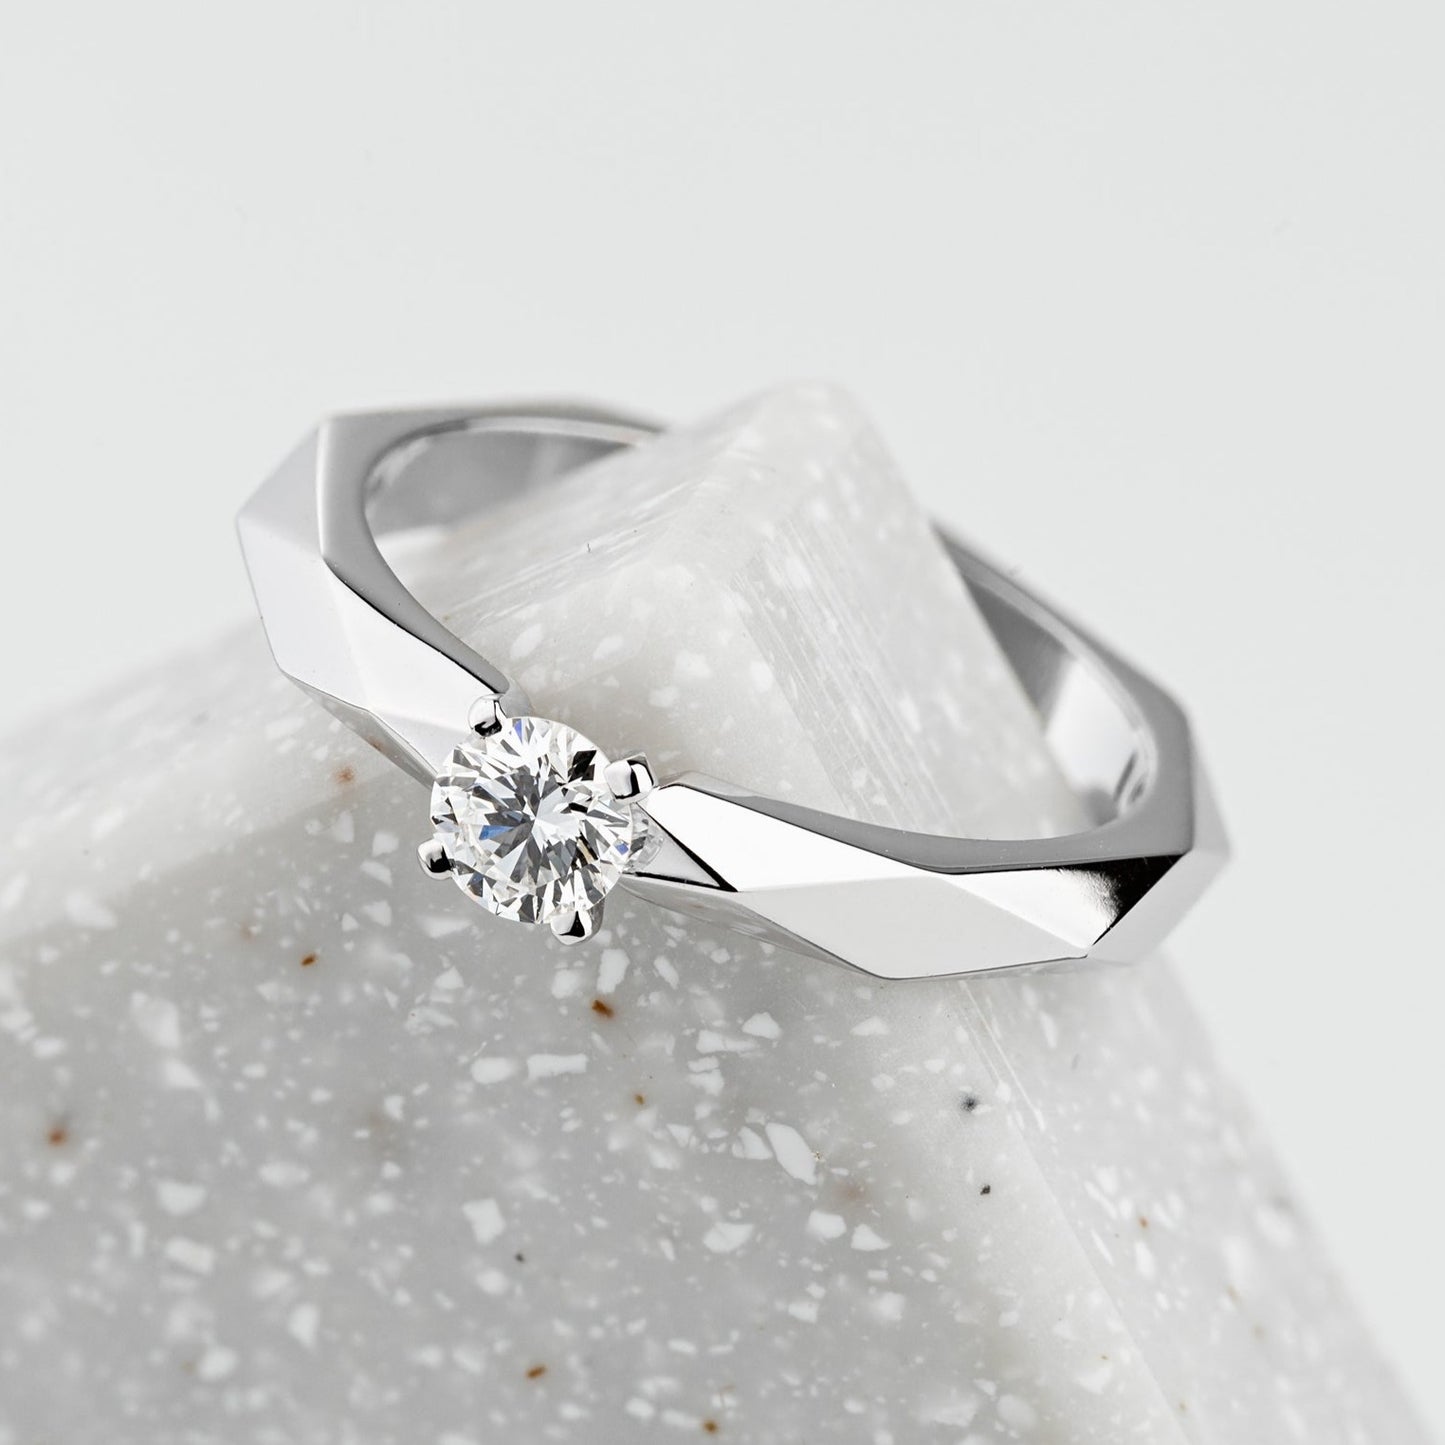 Diamond engagement ring with unique faceted design. Solitaire Engagement Ring. White gold engagement ring. Natural diamond engagement ring. White gold diamond ring